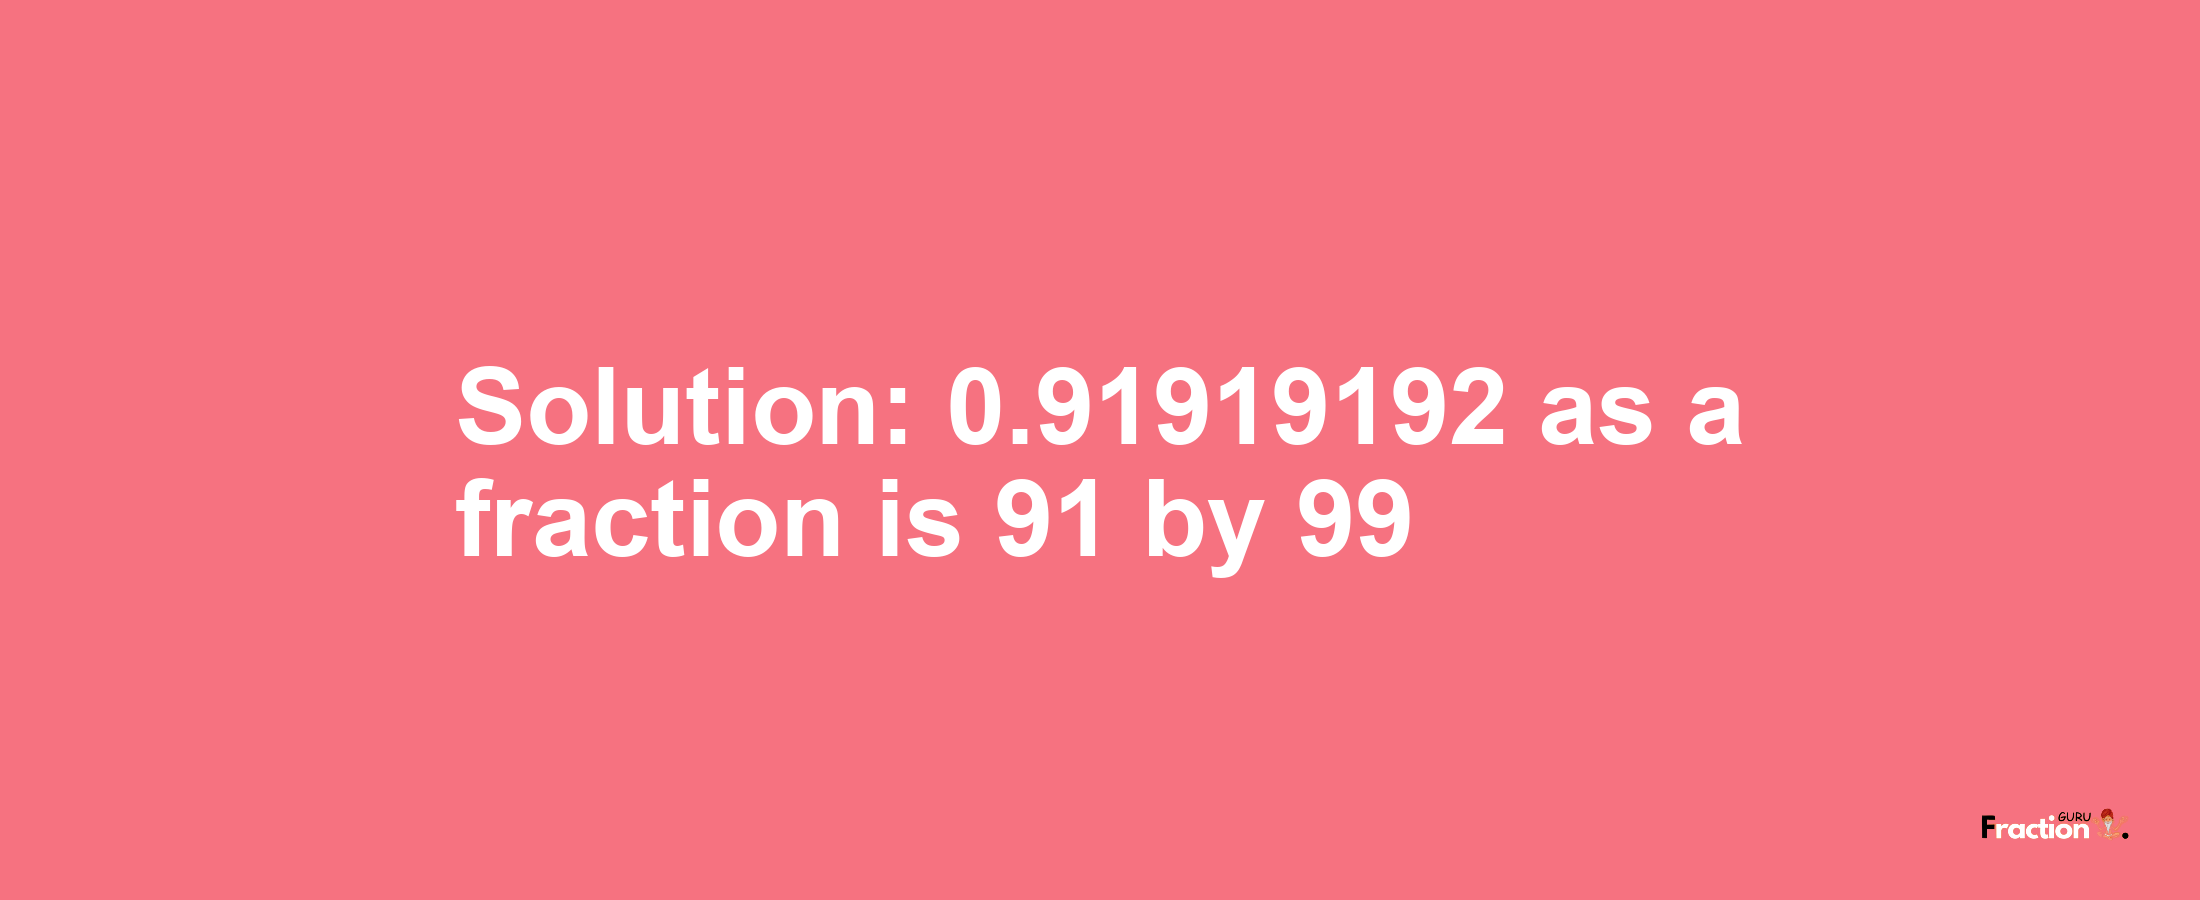 Solution:0.91919192 as a fraction is 91/99